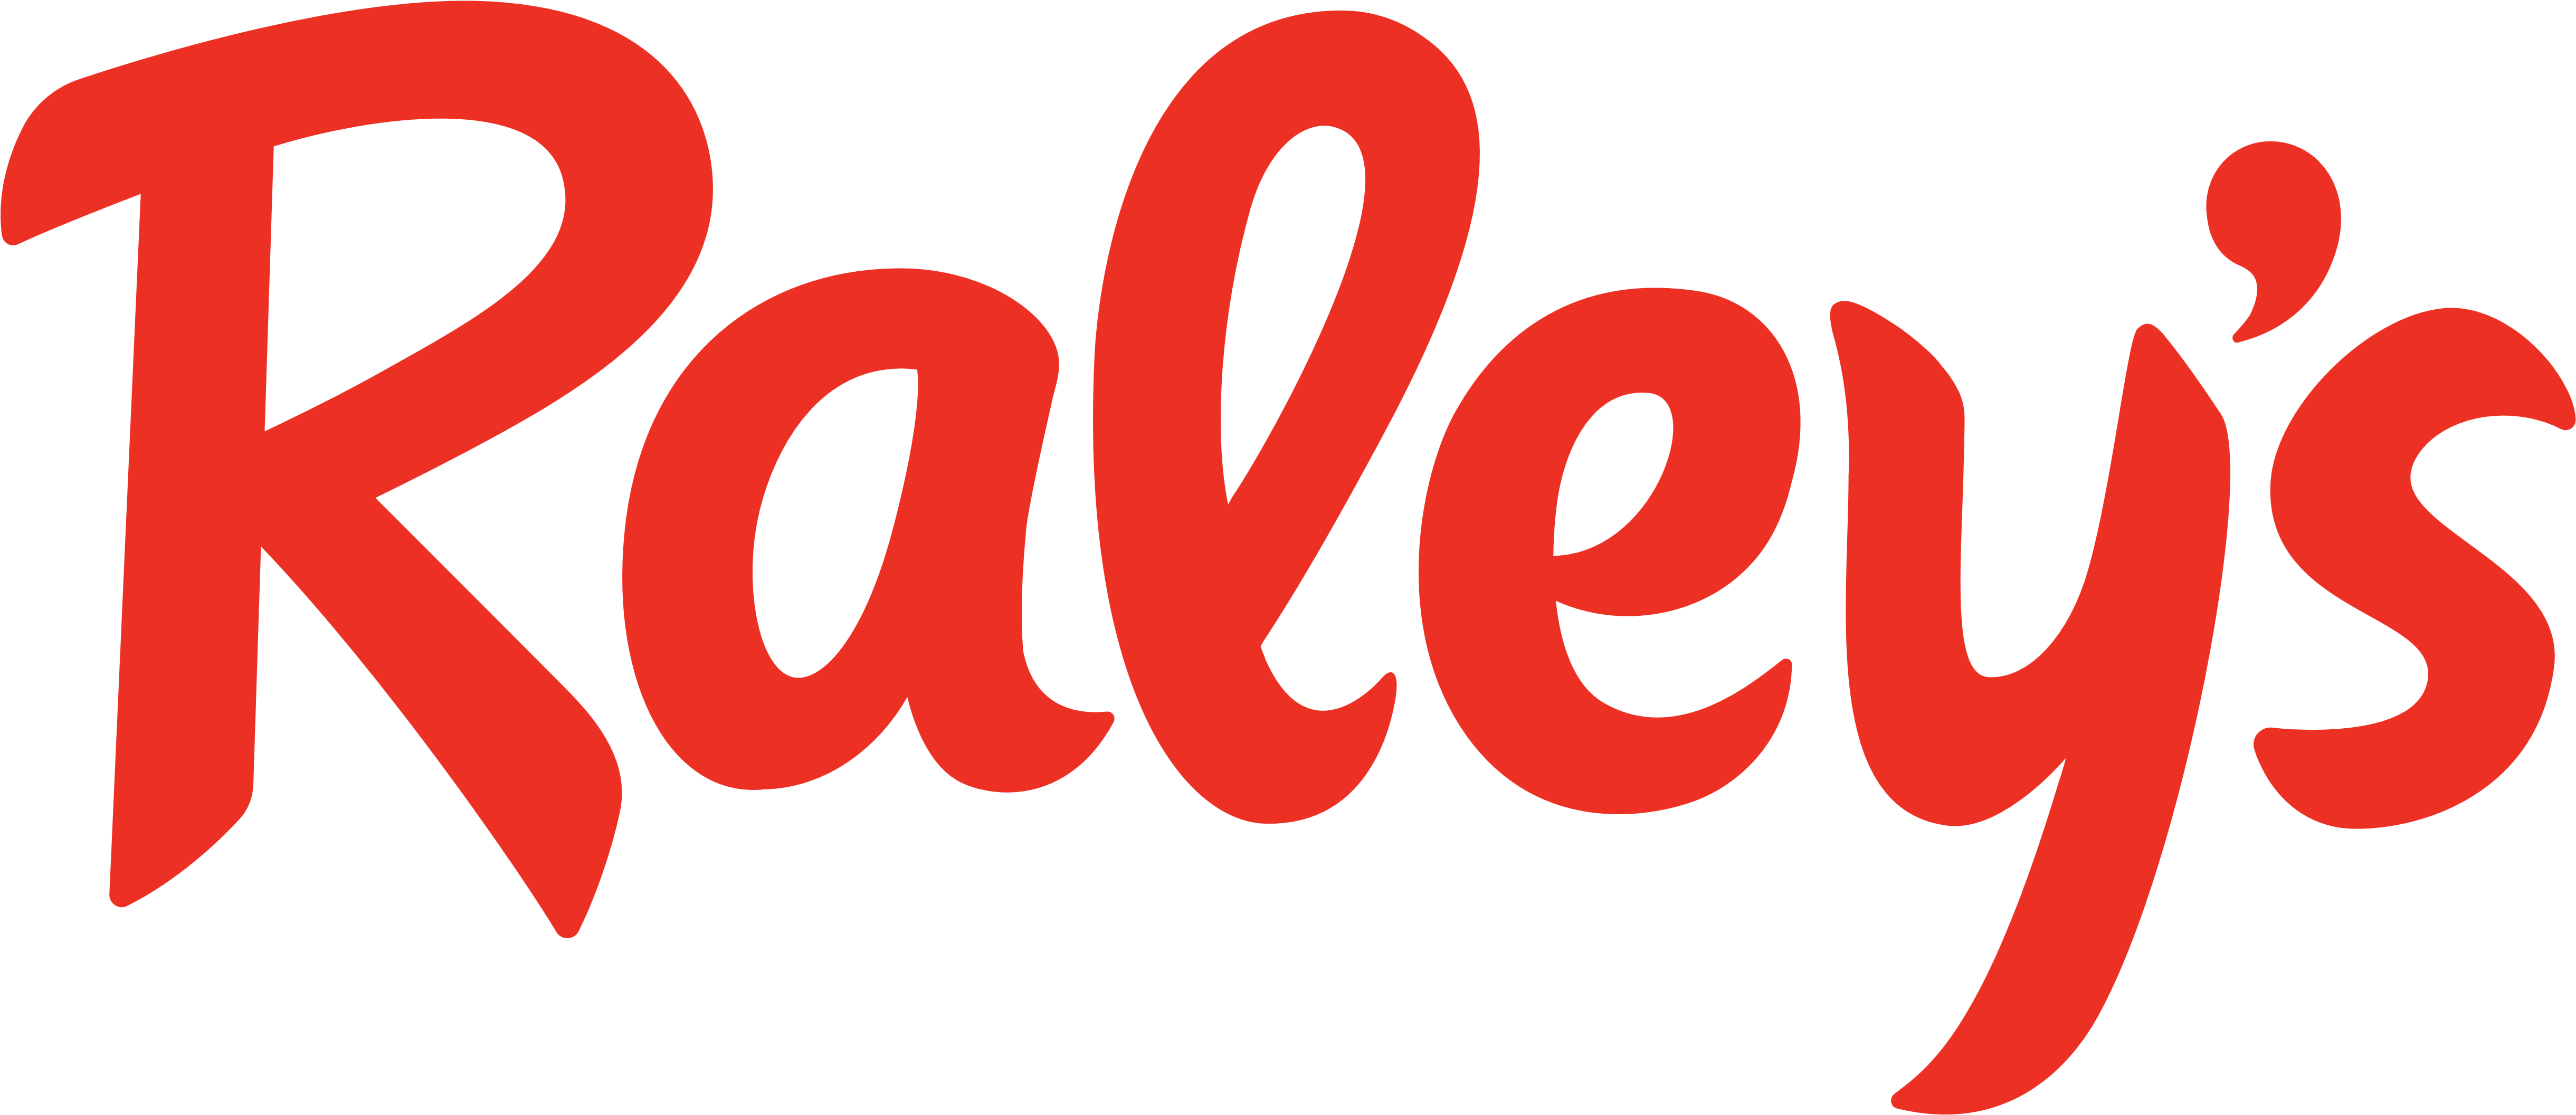 Some Logos Are Clickable And Available In Large Sizes - Raleys Supermarket Logo (5000x2124)